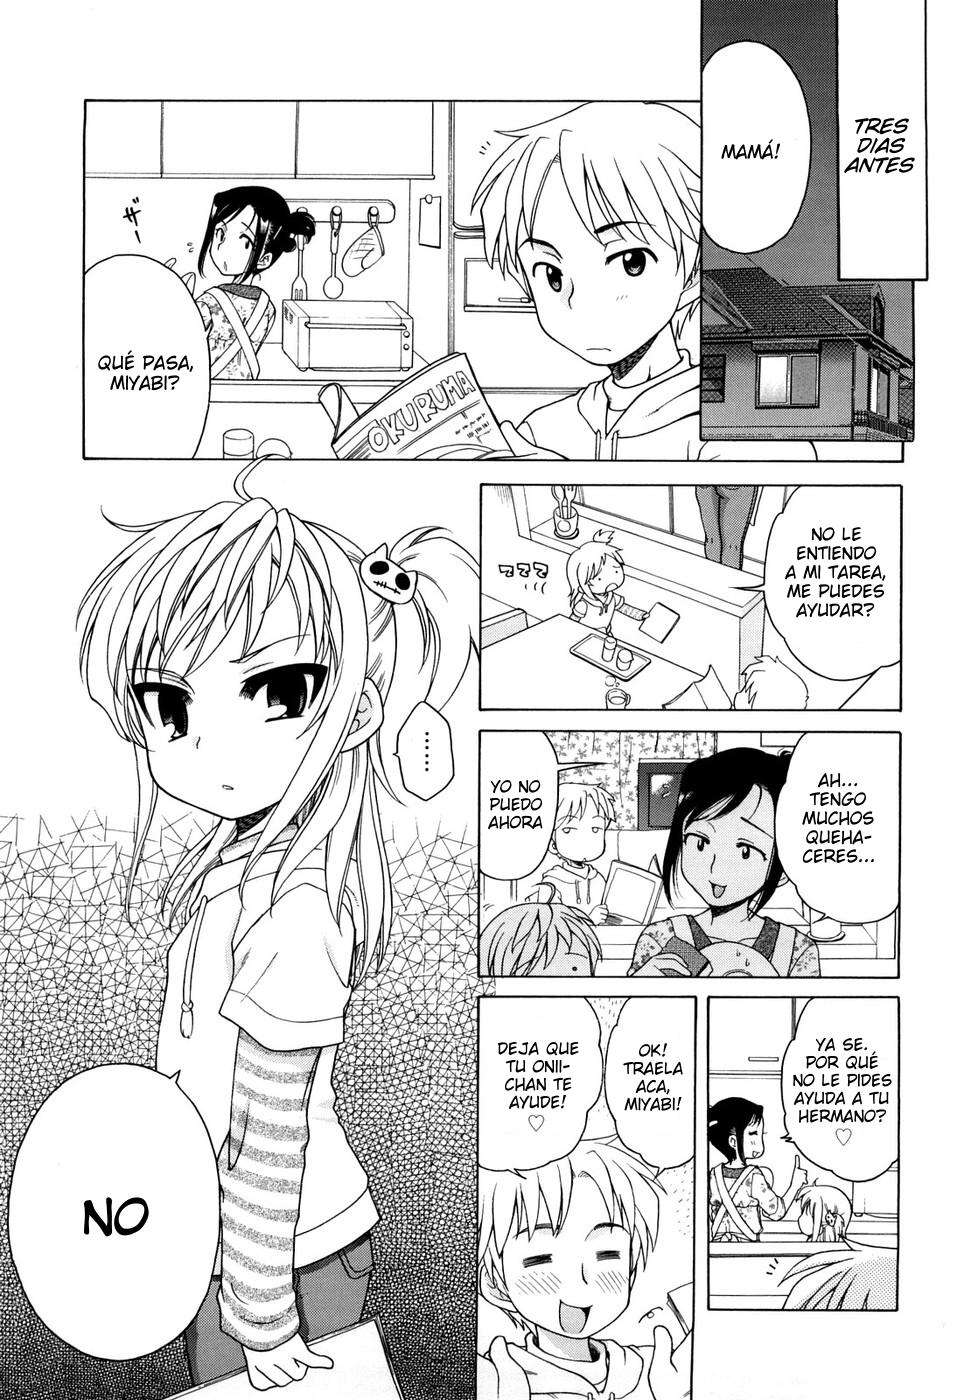 Onii-chan!! Me gustas.. Chapter-1 - 9